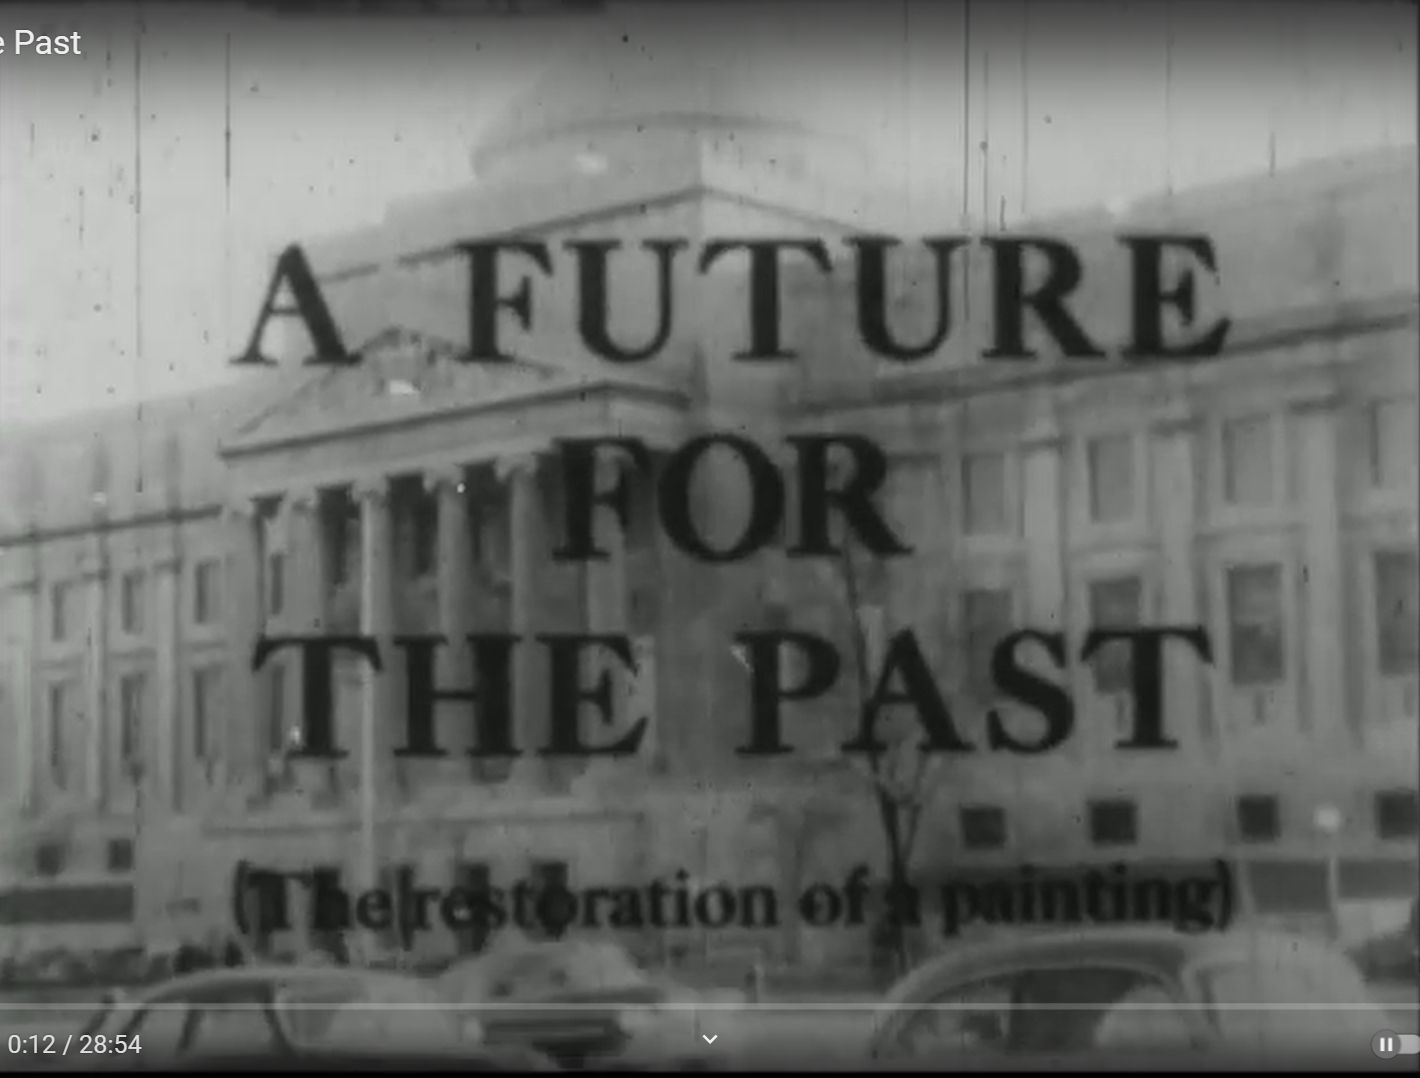 A Future for the Past (1953). Film made by Caroline and Sheldon Keck at the Brooklyn Museum. Film and image published courtesy of the Brooklyn Museum